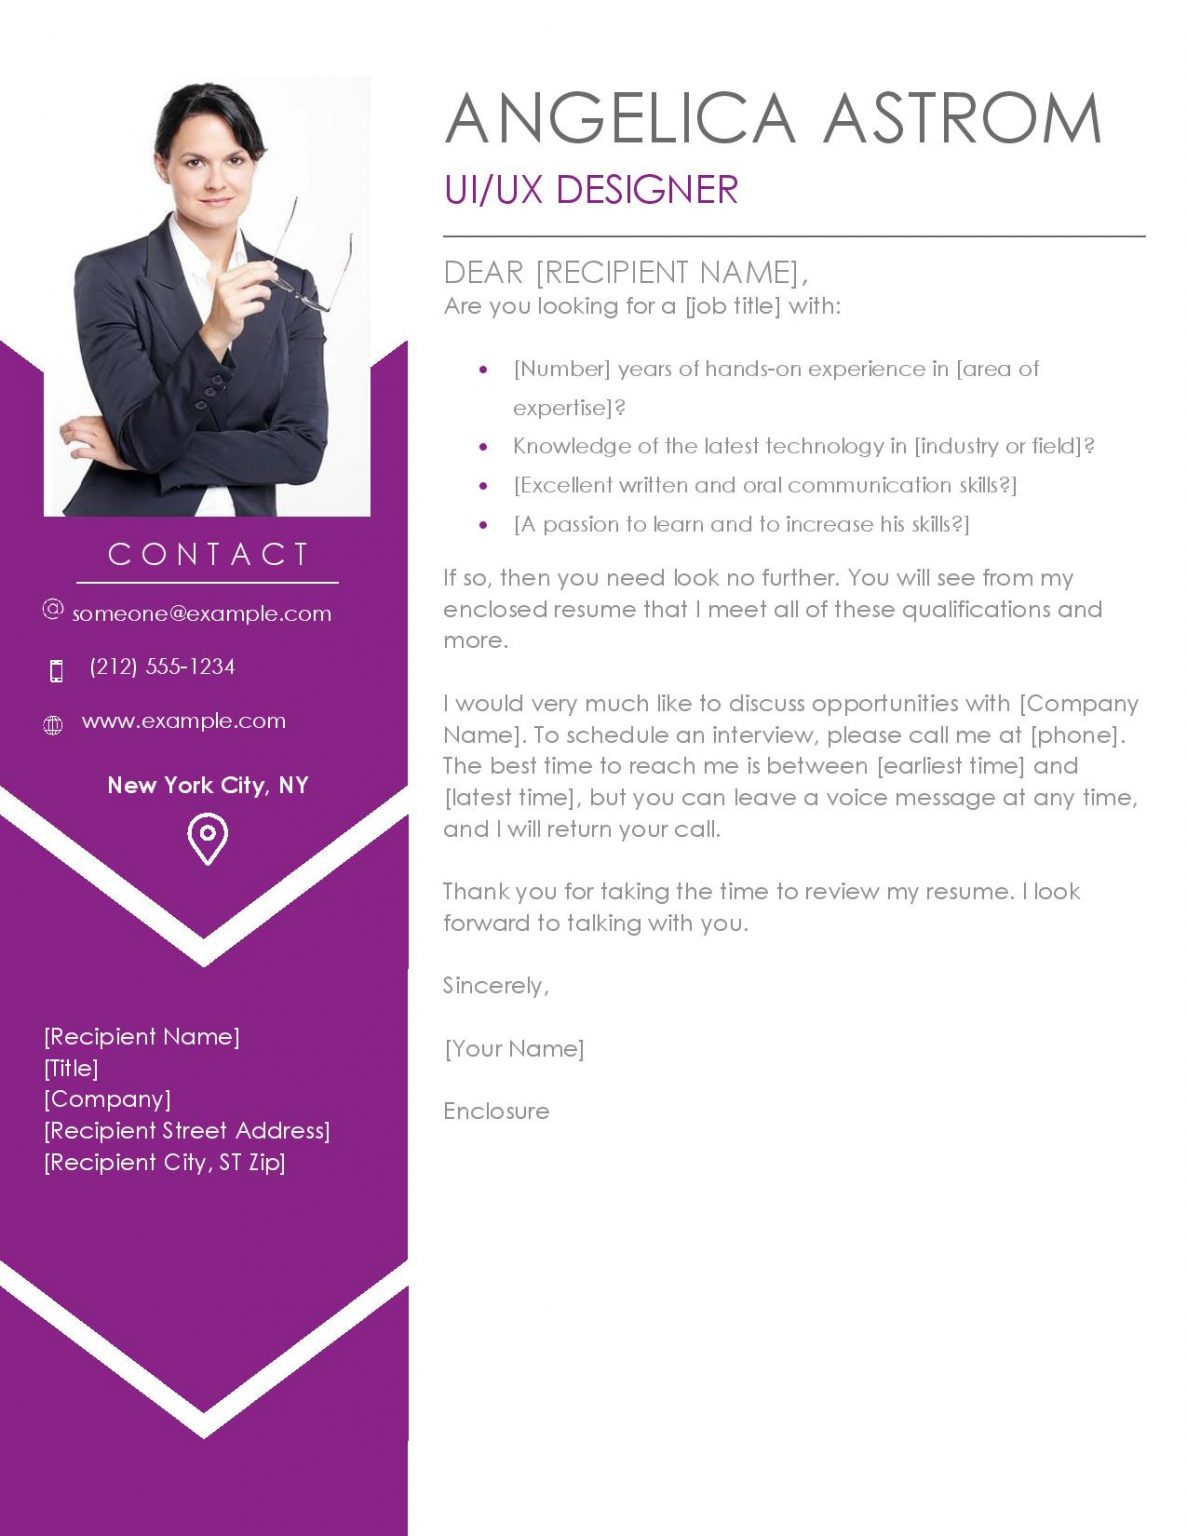 resume and cover letter design